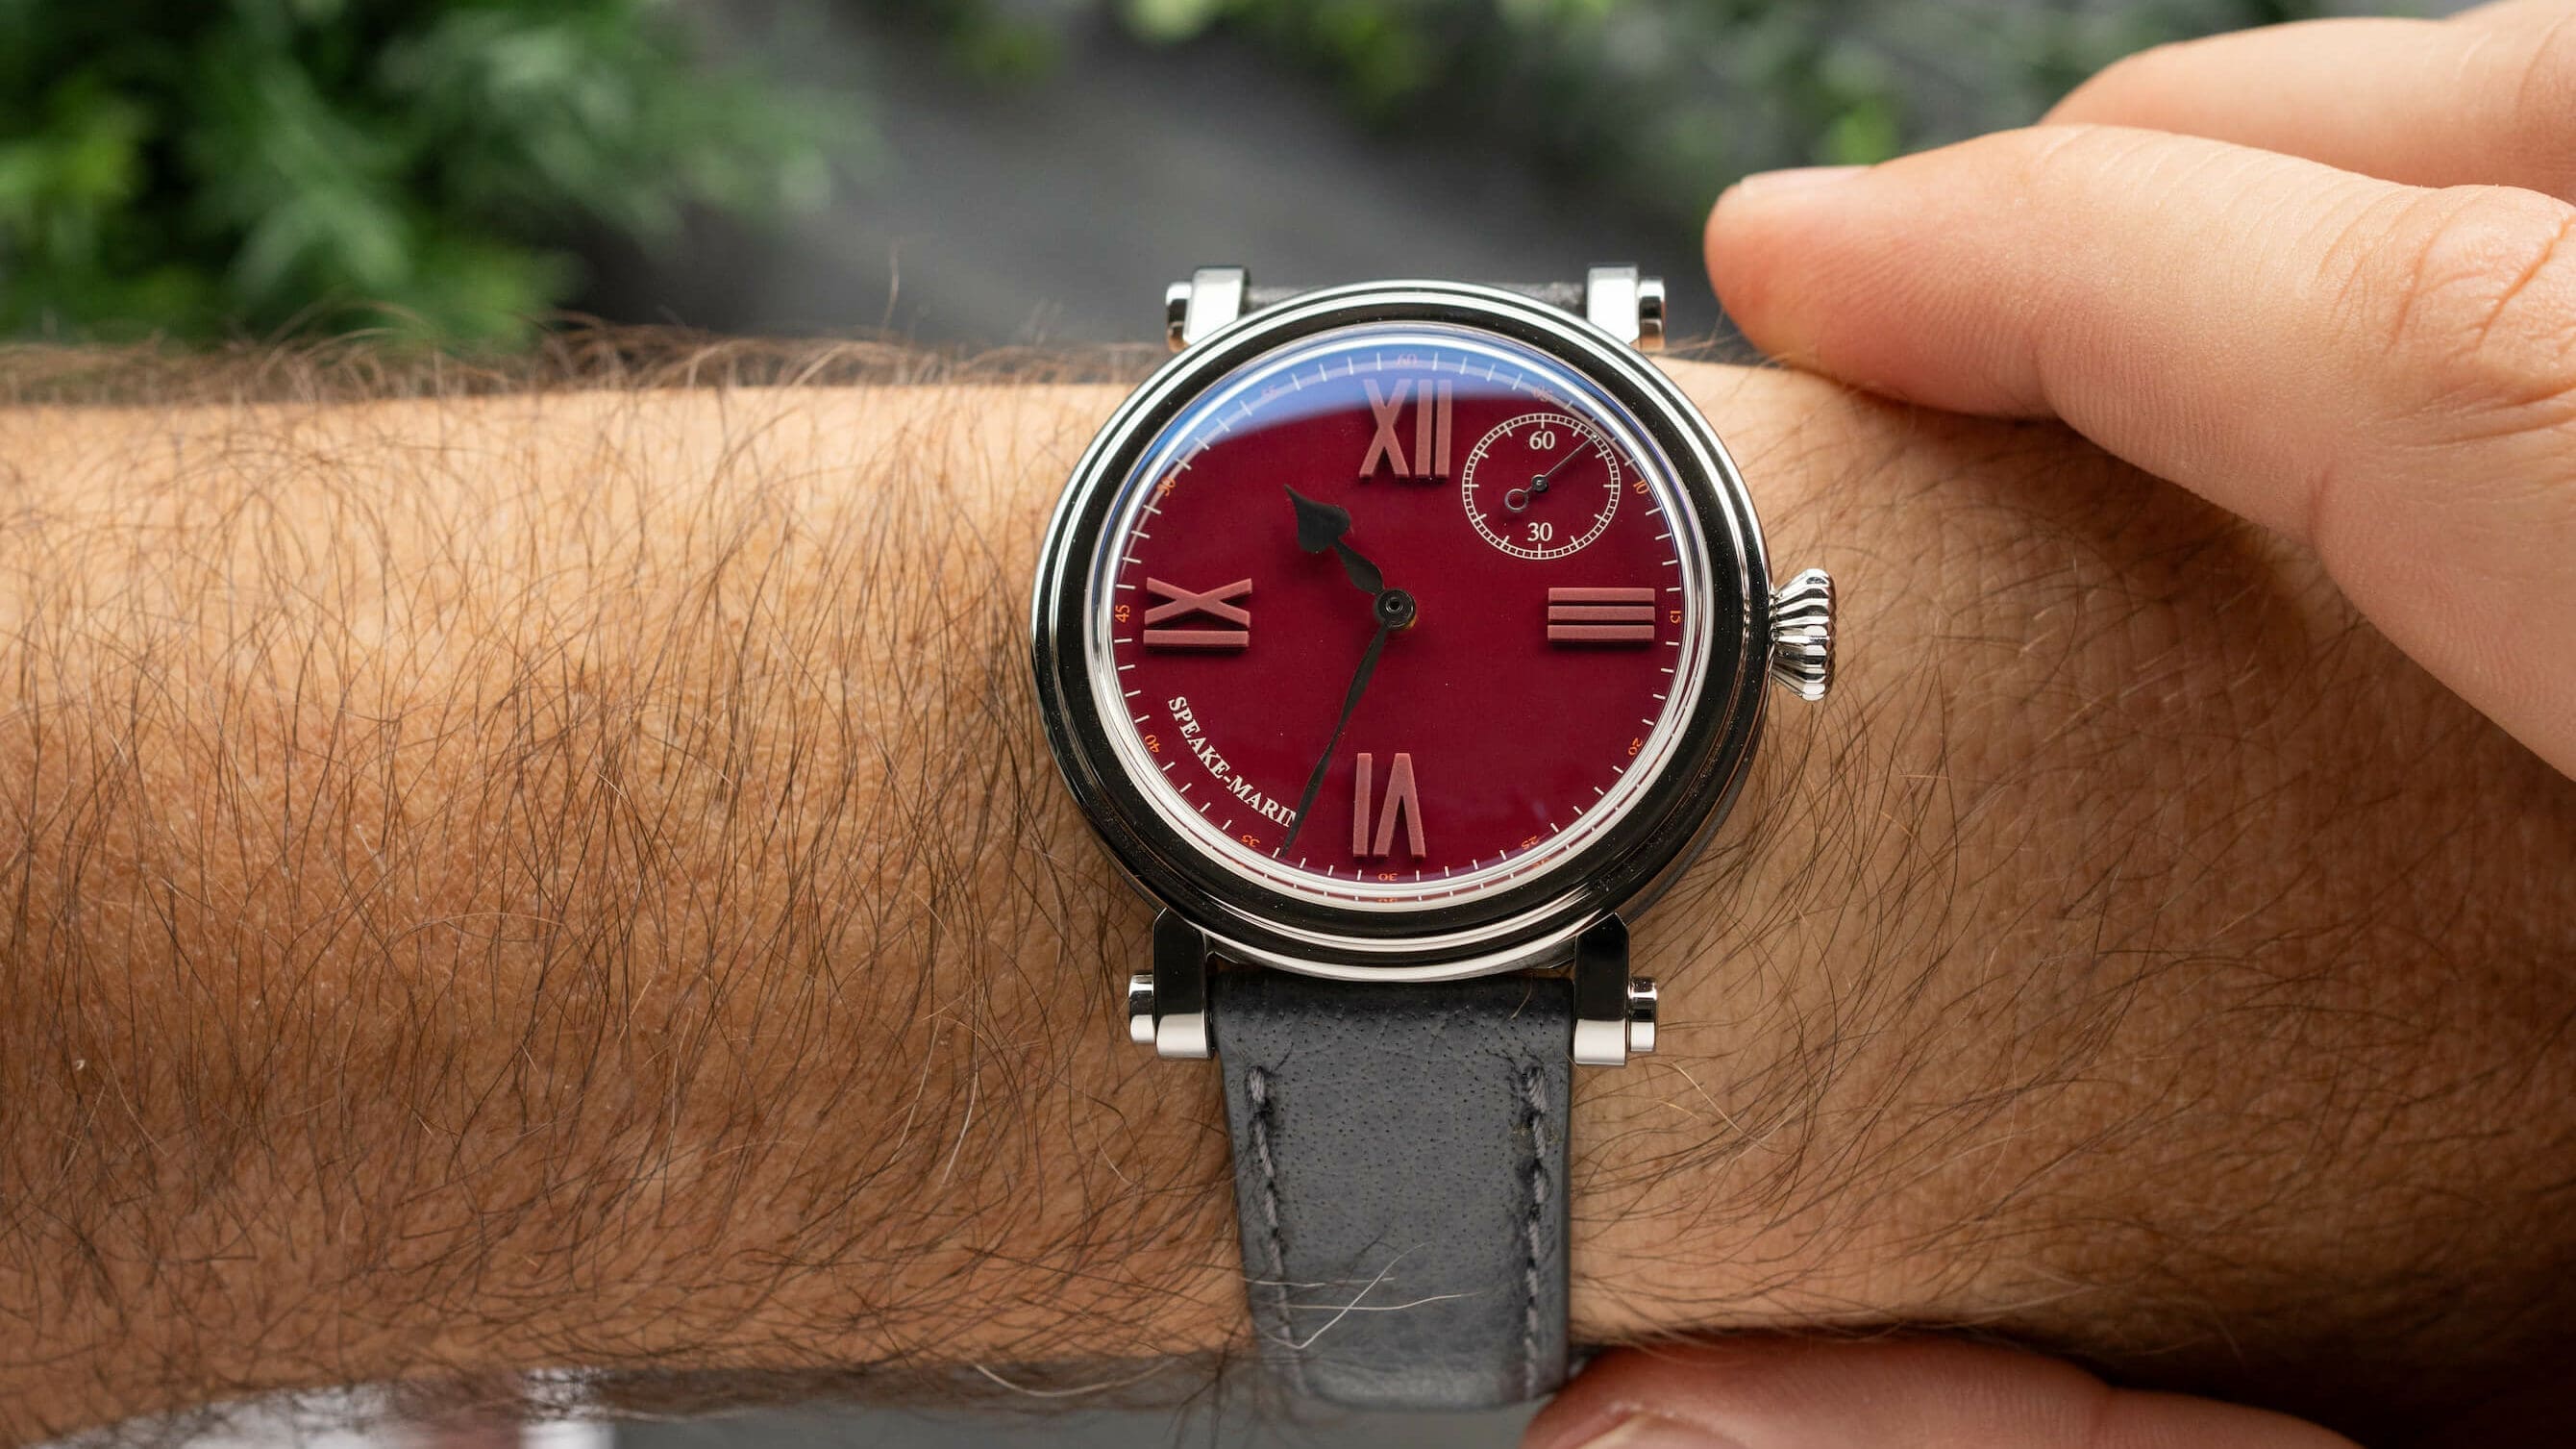 The new Speake-Marin Academic Rouge offers their entry design in a new hue